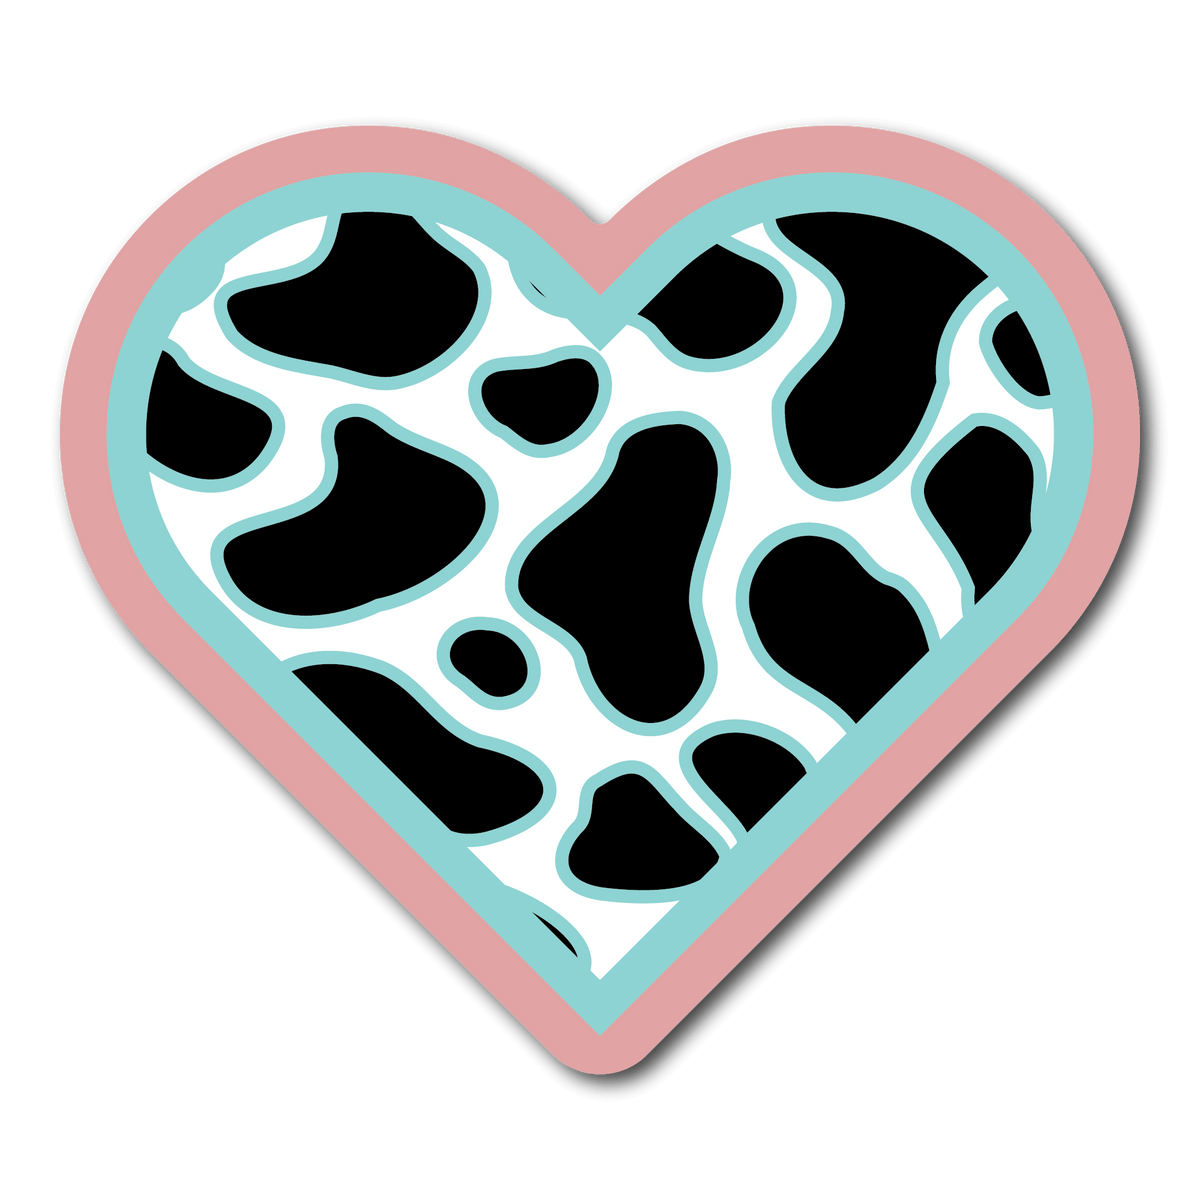 Small Heart Sticker with cow print inside. The heart has a pink and blue outlines